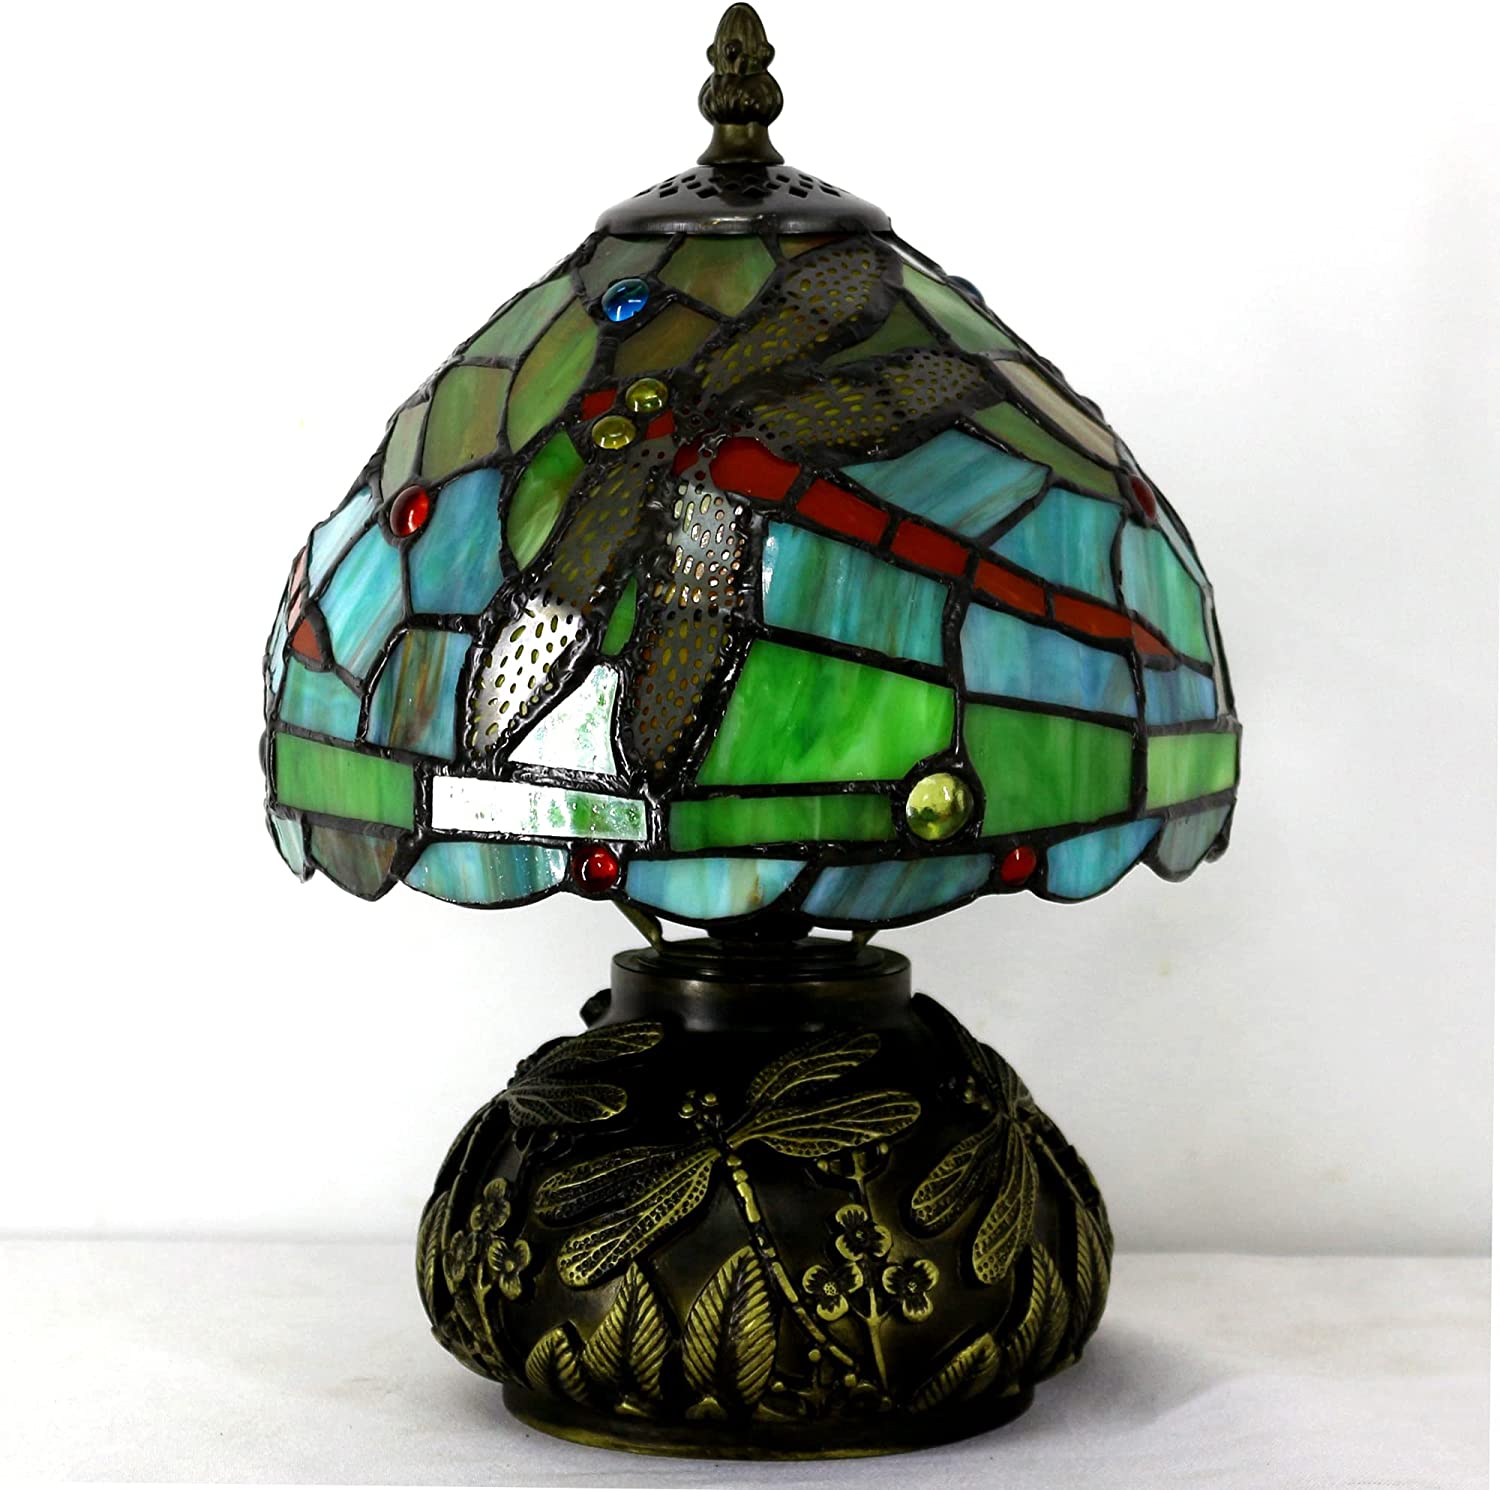 Werfactory® Tiffany Lamp W8H11 Inch Stained Glass Red Dragonfly Style Table Lamp Mushroom Lamp